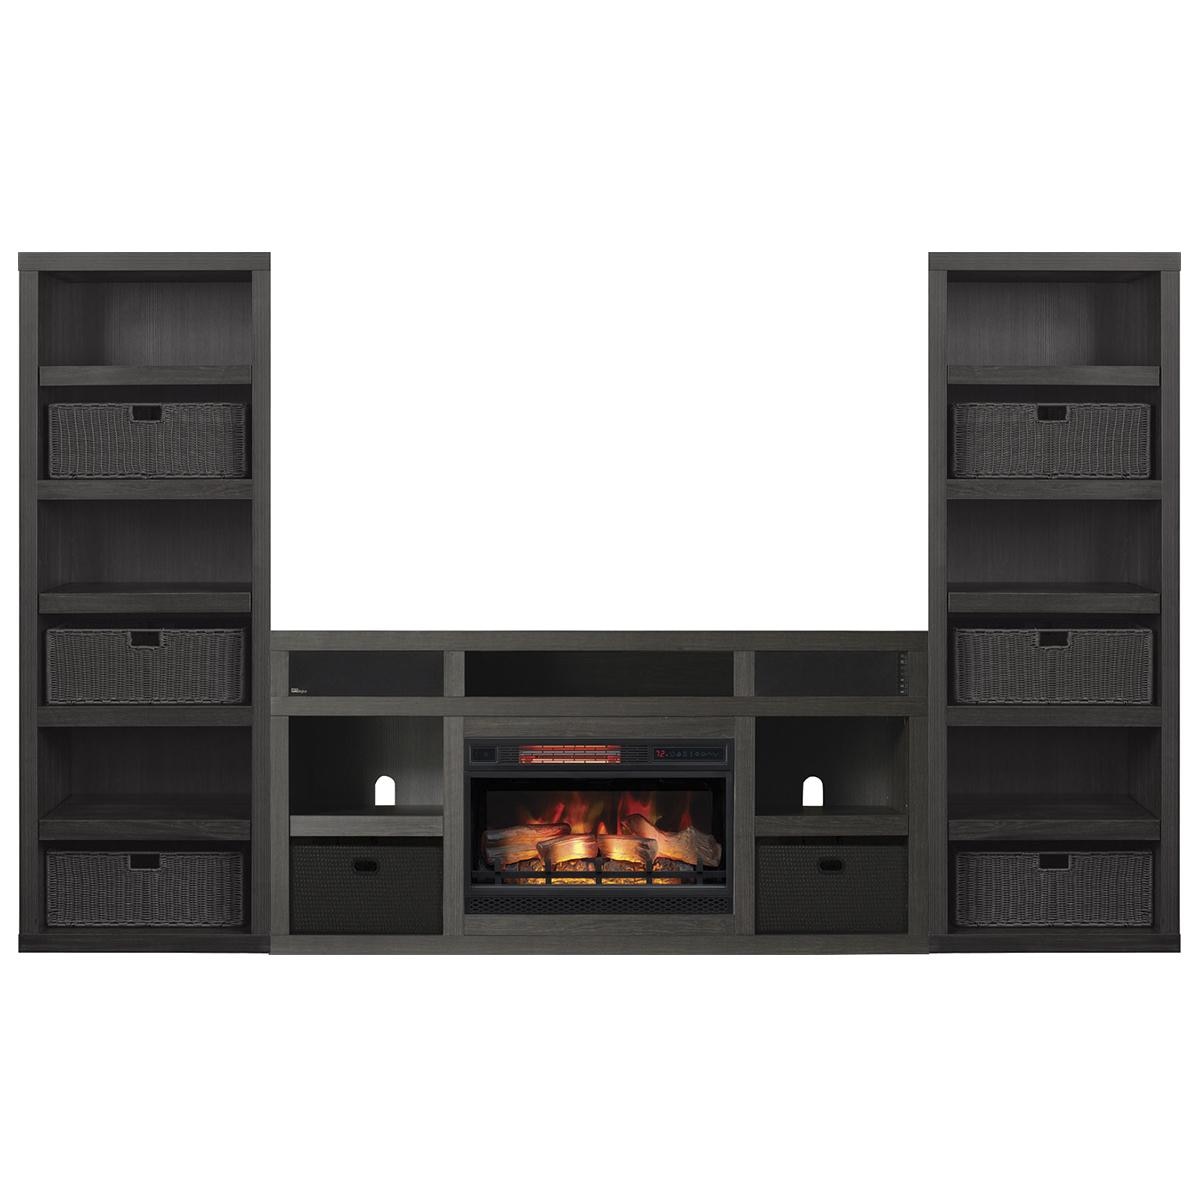 Bluetooth Fireplace Awesome Fabio Flames Greatlin 3 Piece Fireplace Entertainment Wall